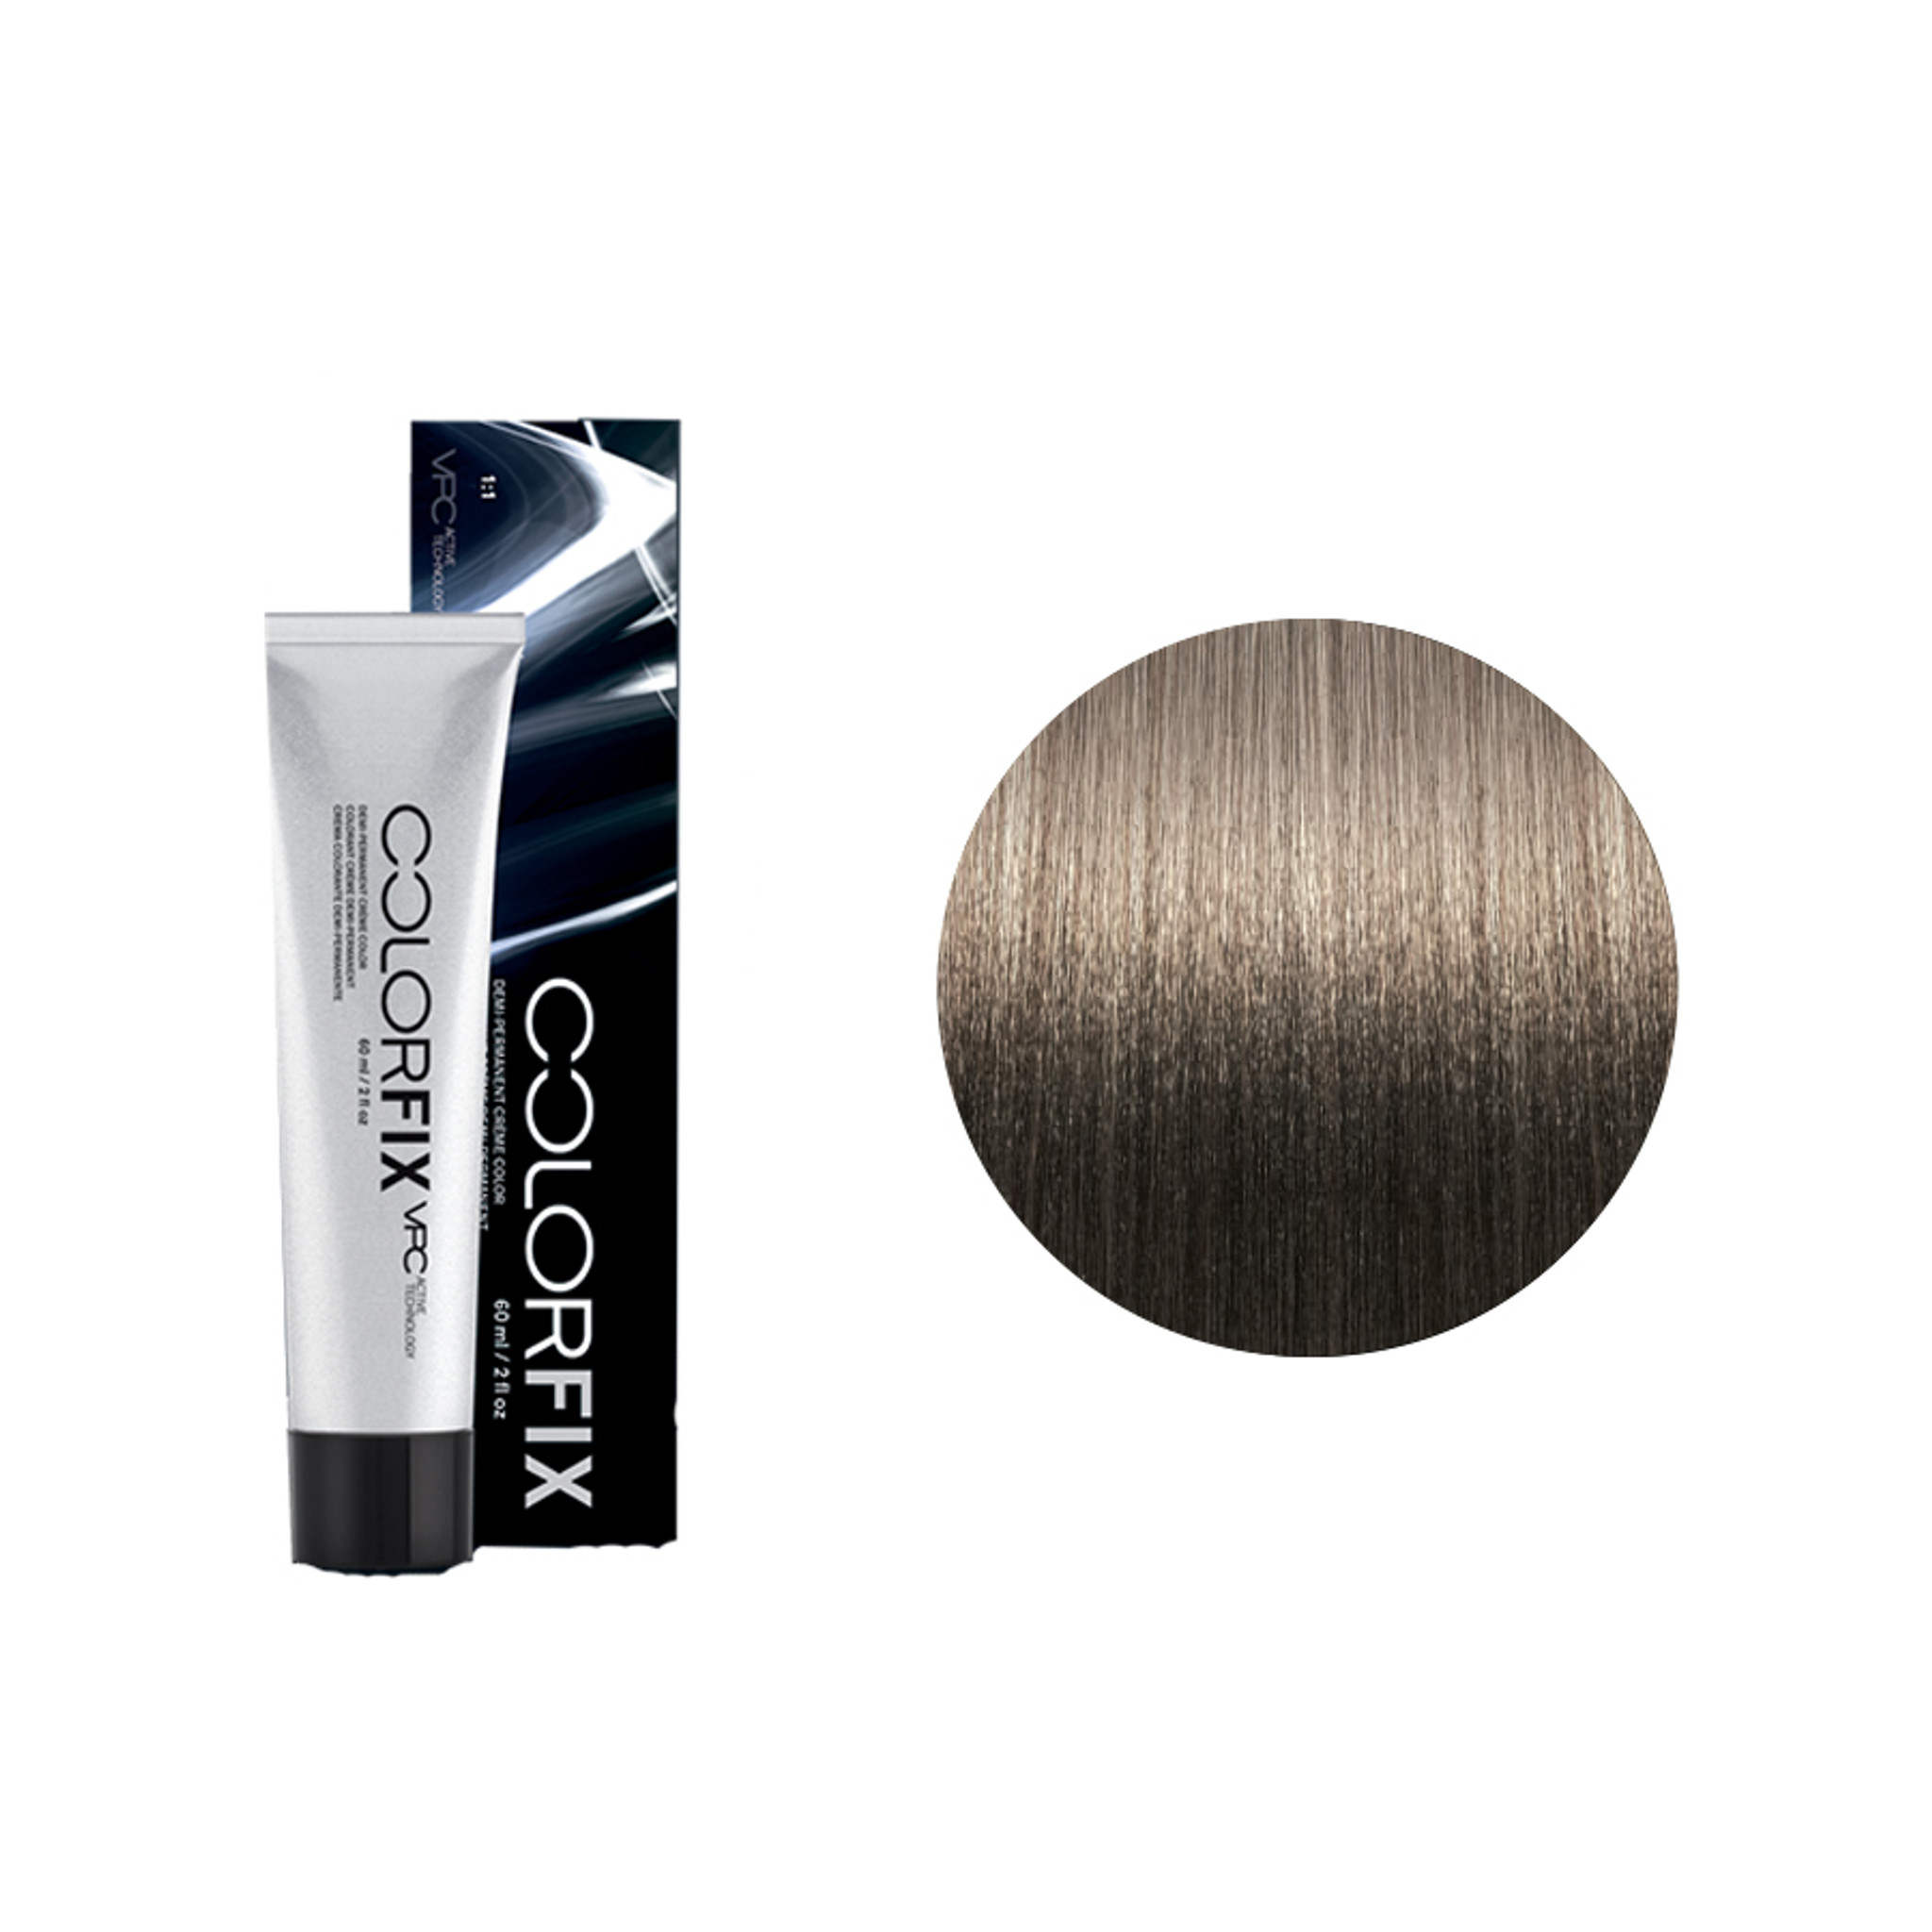 Color Fix 7N-8N Light Fix Creme Colour 60ml by Shop Salon Support - official distributor of Cover Line Professional Hair Products, Hair Colours, Male Hair Dyes and Men's Hair Colors. Salon Support are Hair & Barber Barbershop Trade Wholesale Hairdressing Supplies Melbourne Australia